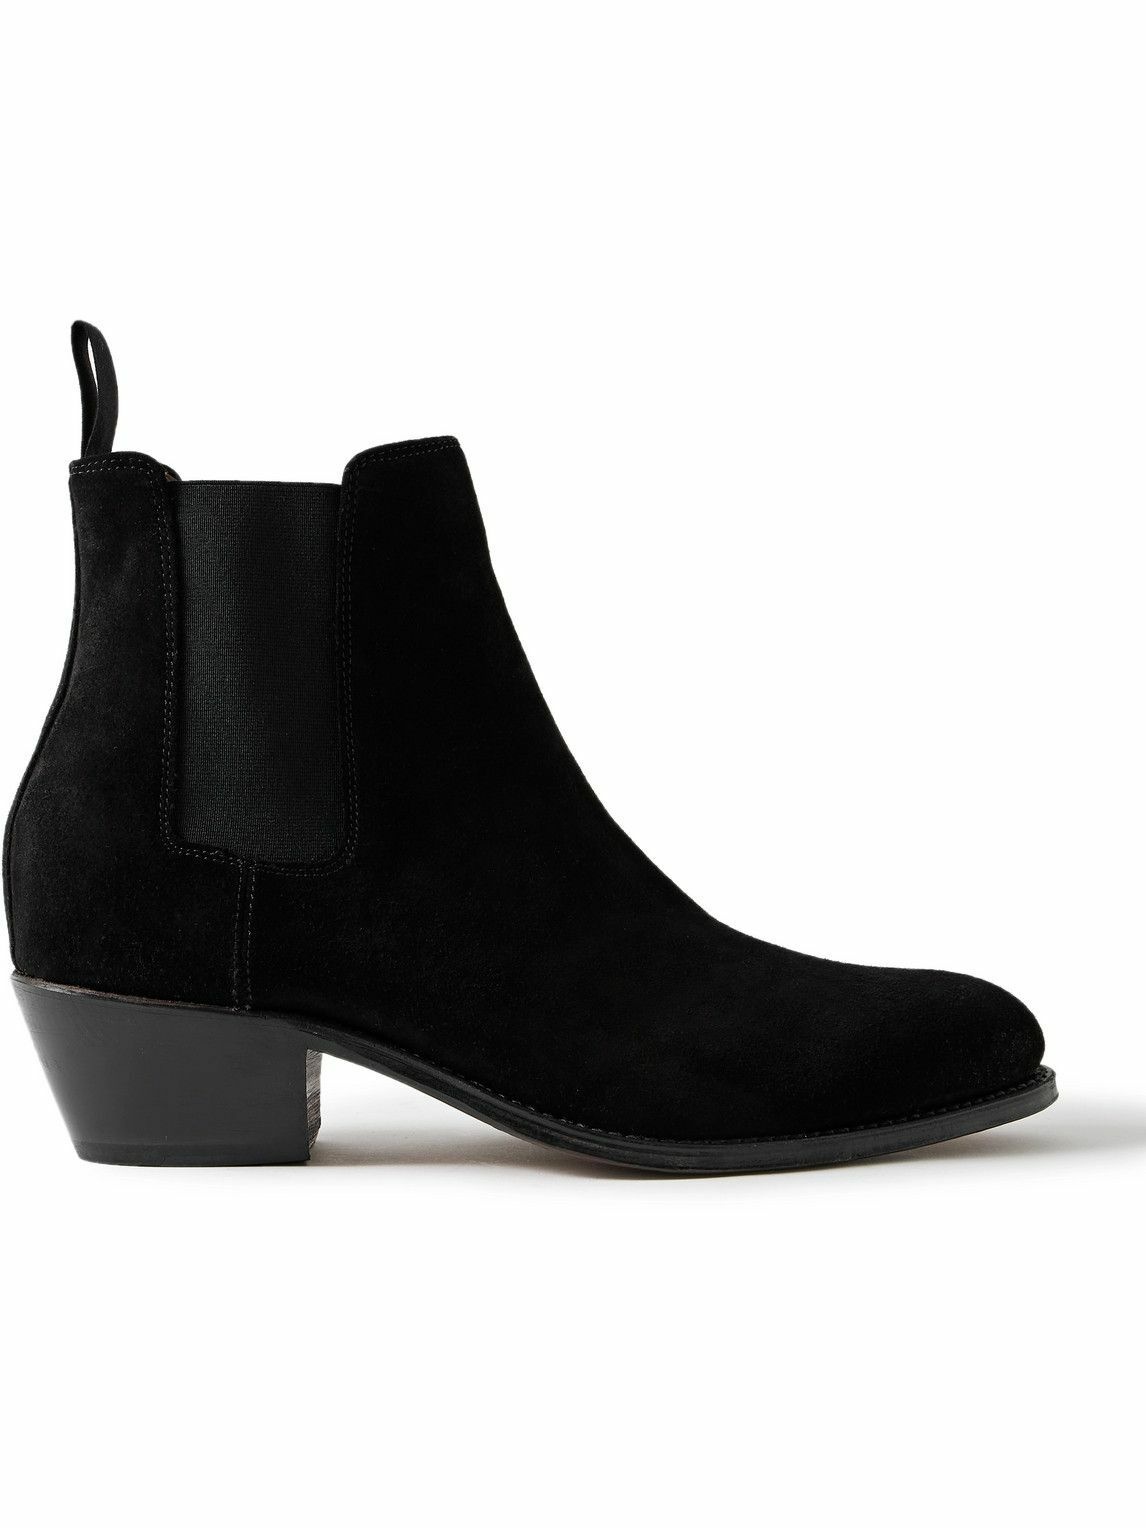 Photo: Grenson - Marco 222F Suede Chelsea Boots - Black